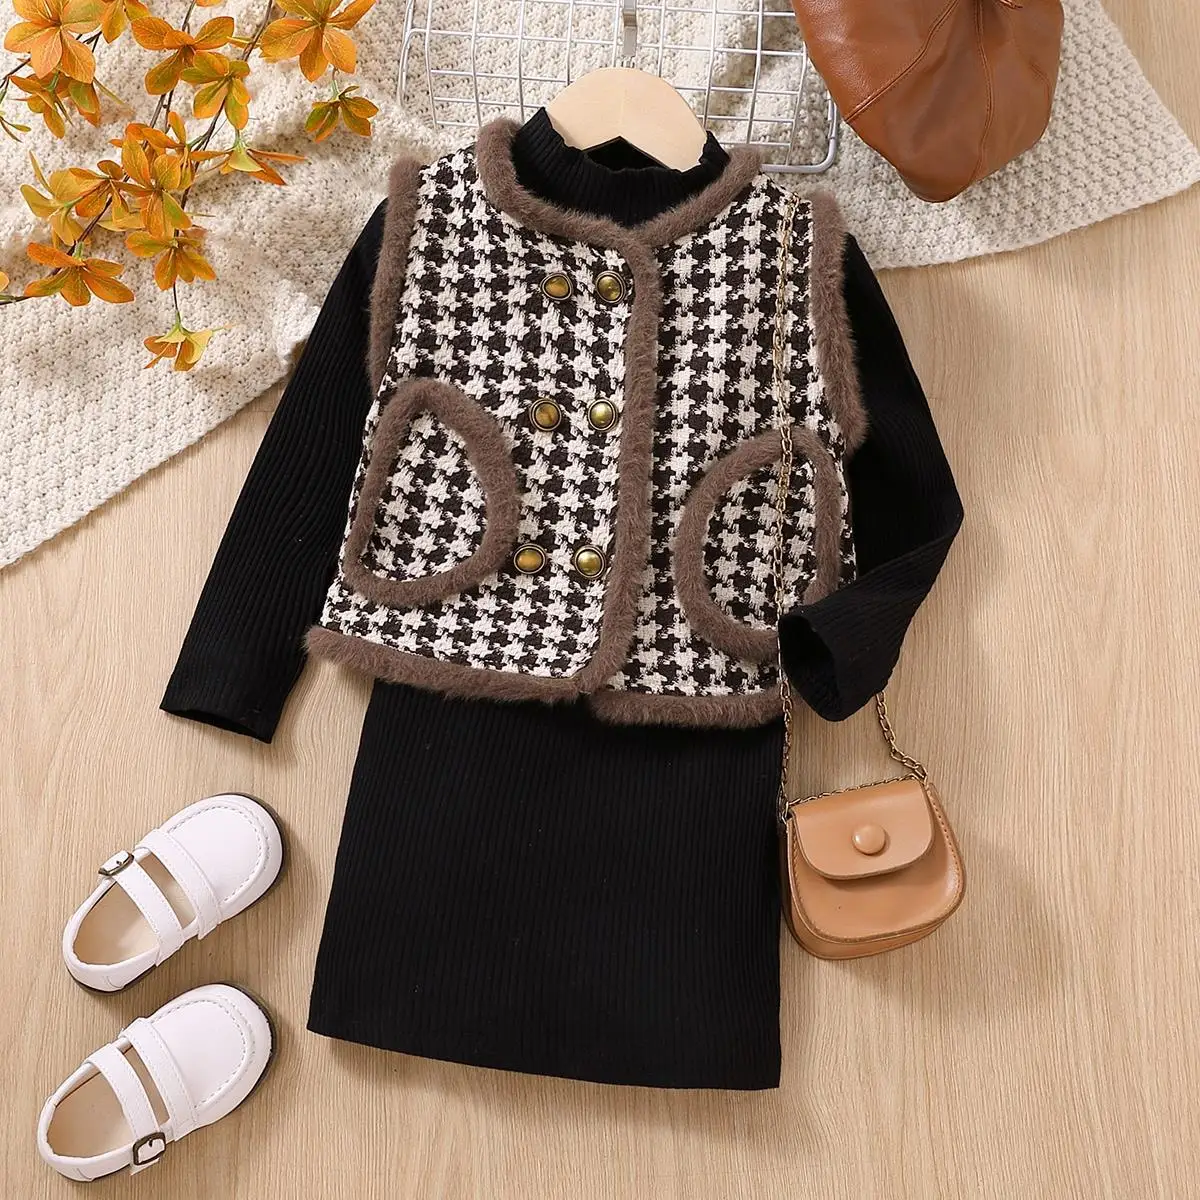 Korean popular toddler girls fall outfits casual knitted dress matching fashion plaid vest two-piece girls clothing suits